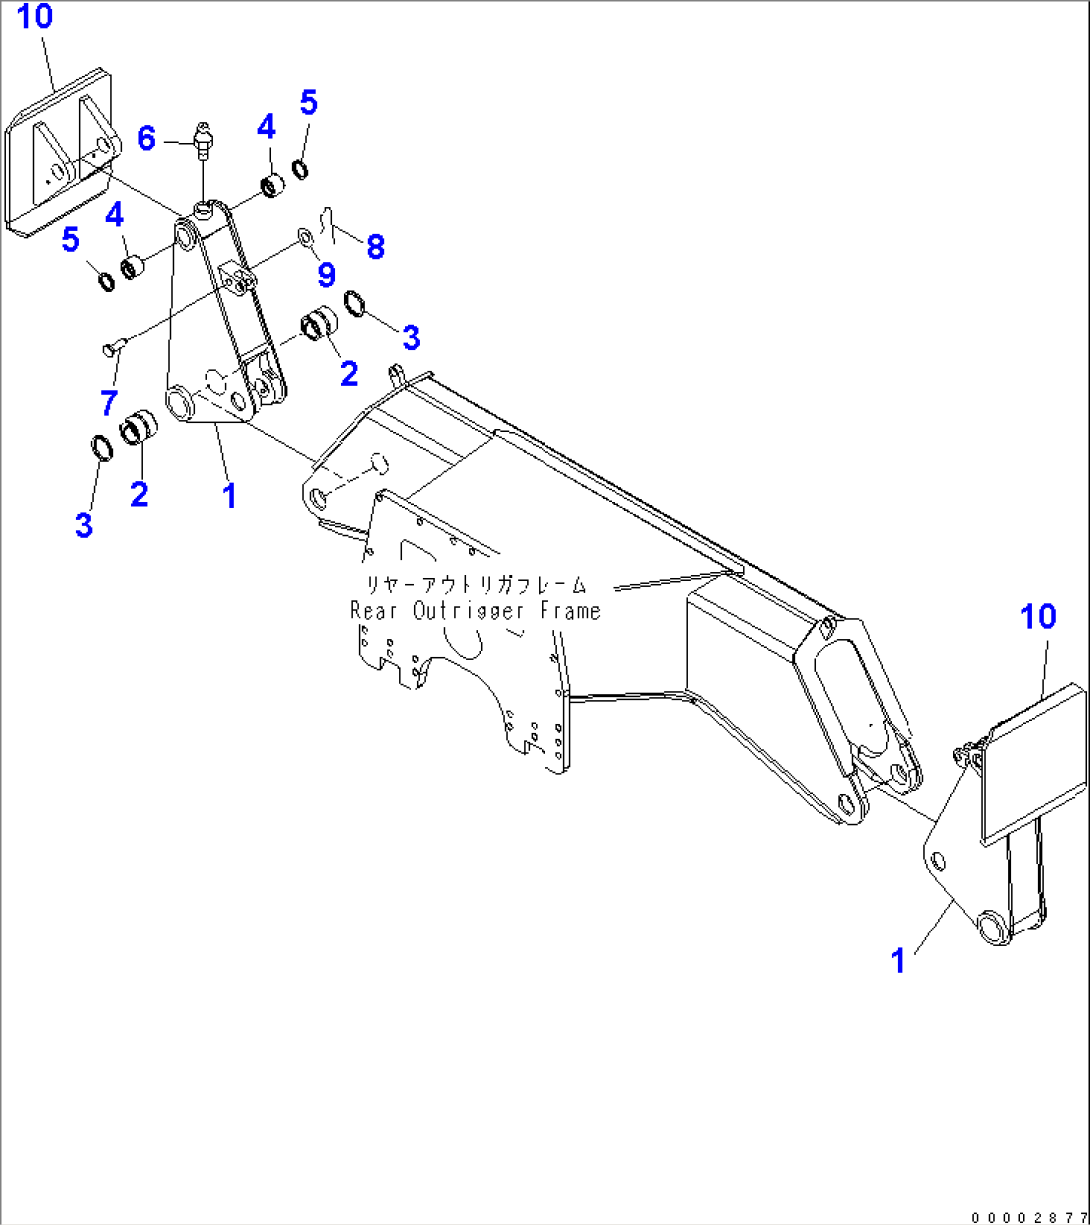 OUTRIGGER (LEGS AND FOOT) (FOR REAR OUTRIGGER)